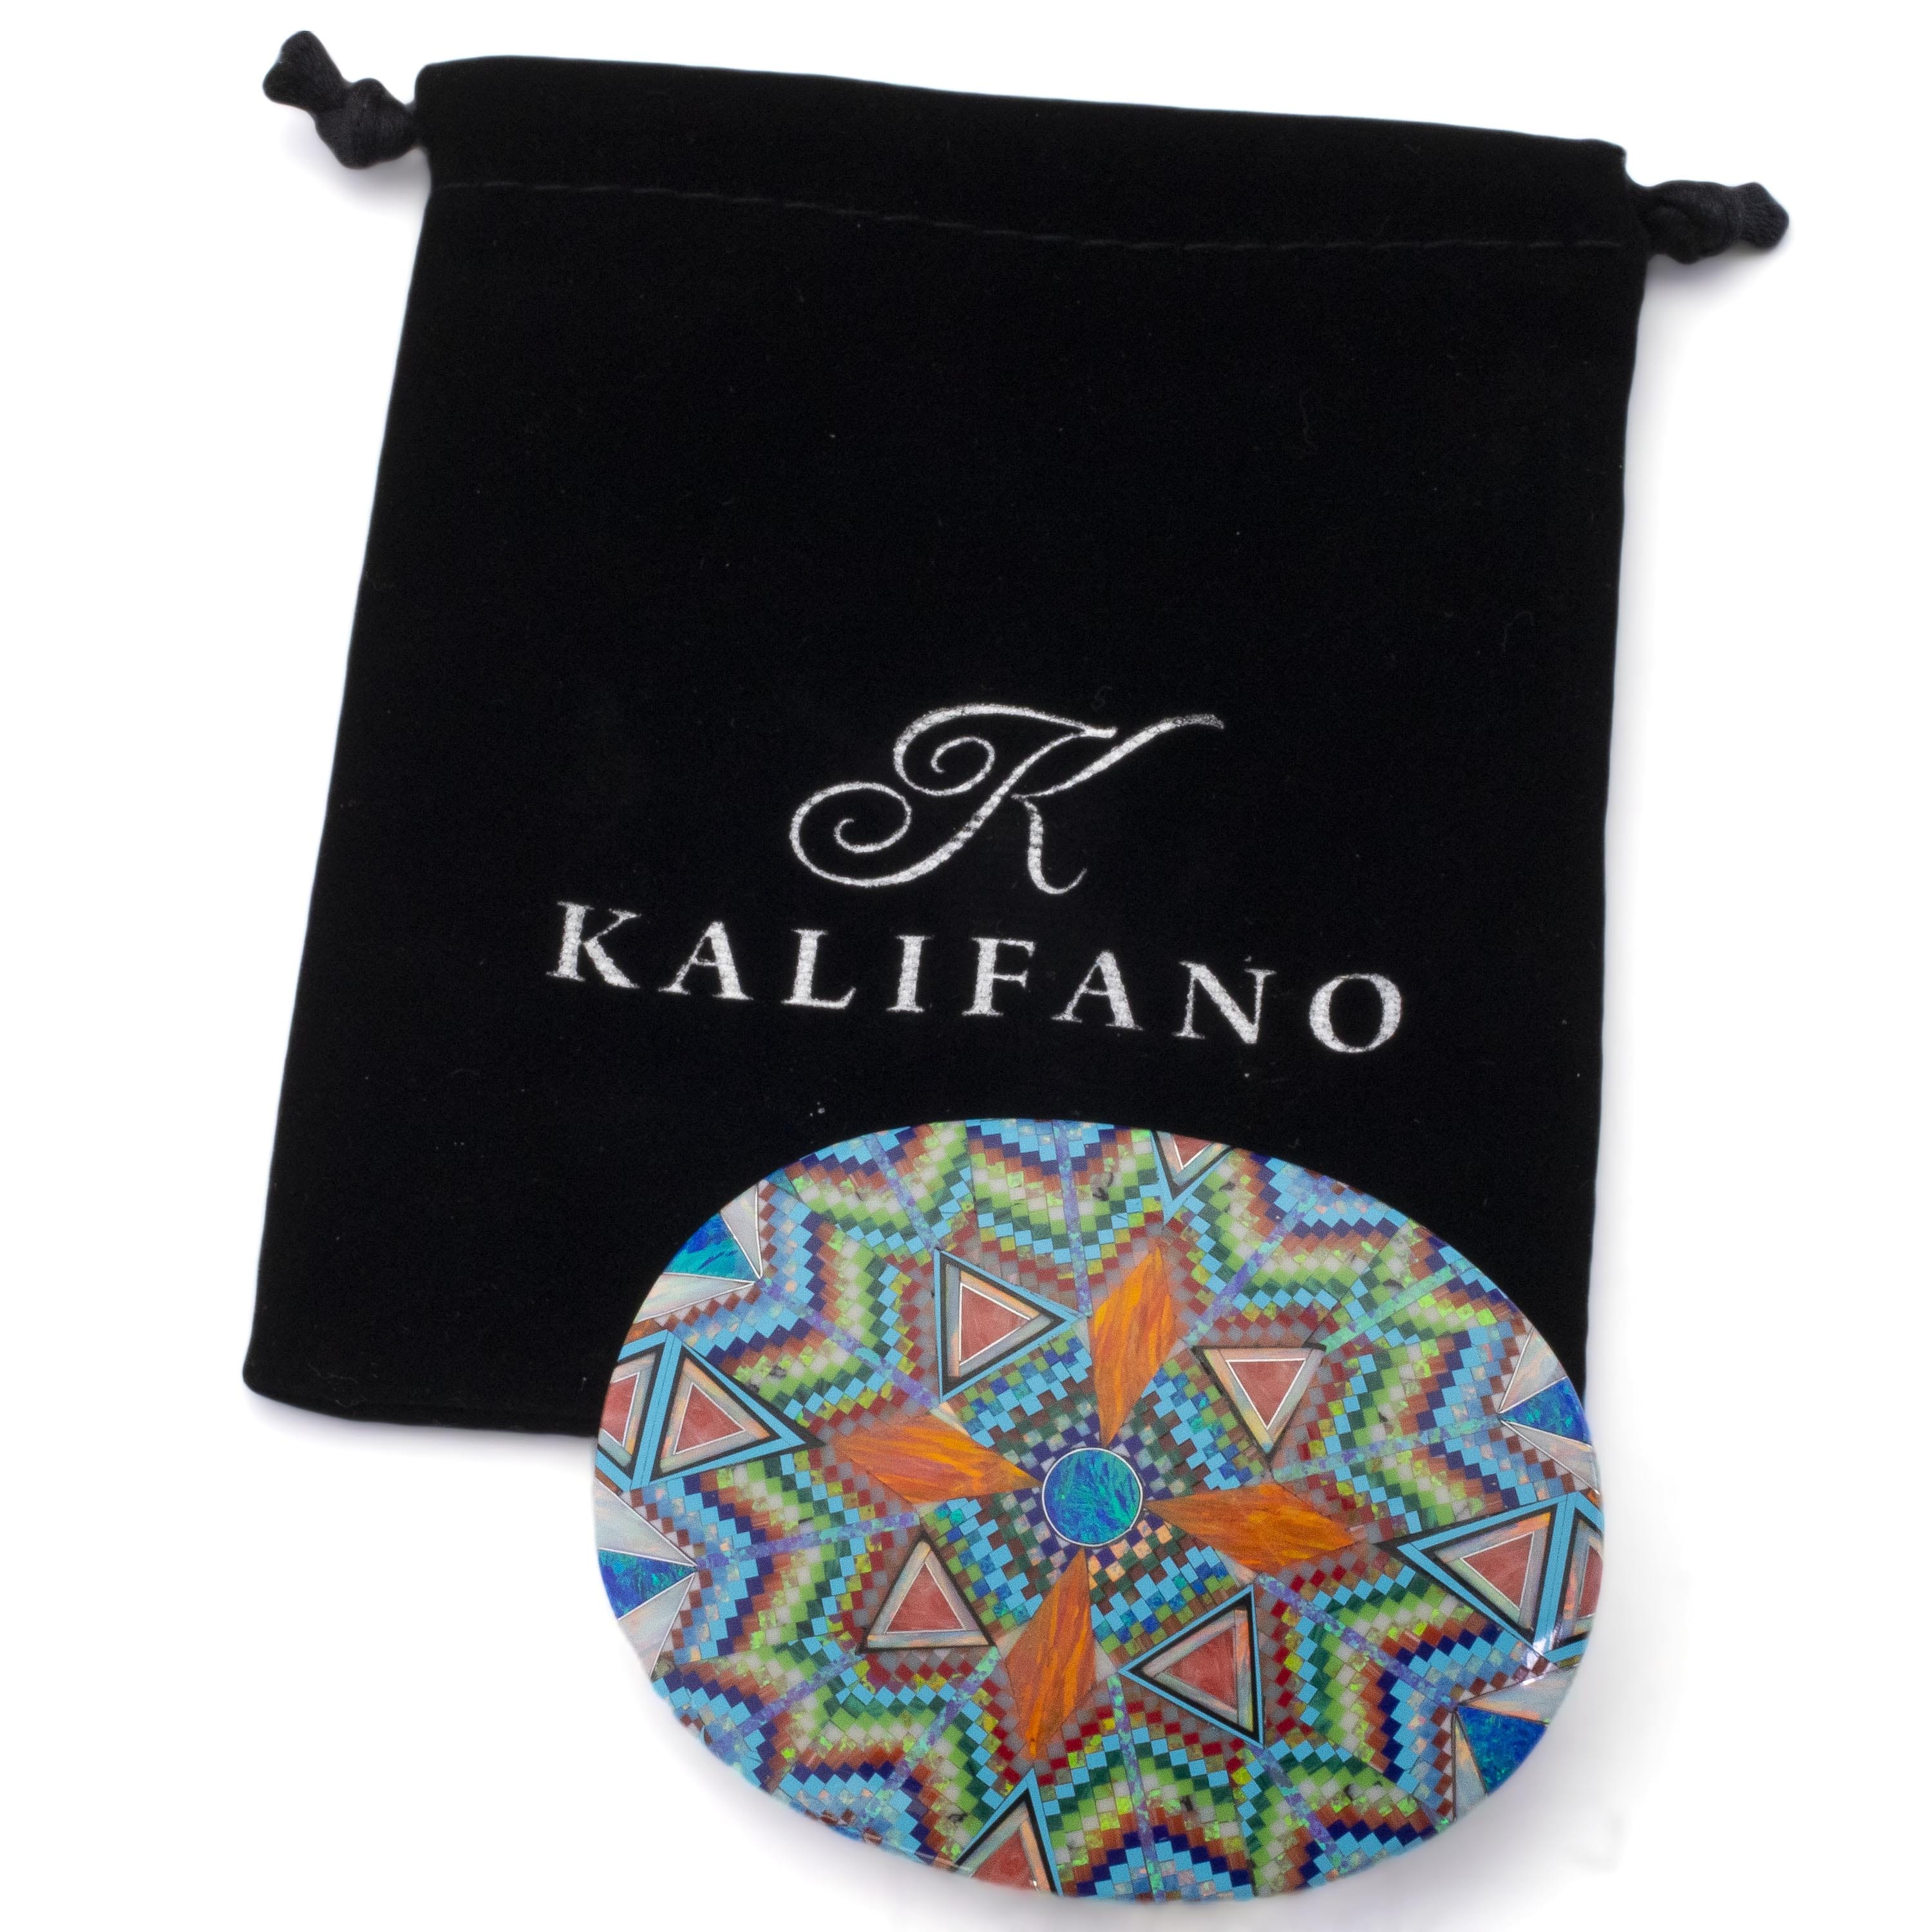 KALIFANO Southwest Silver Jewelry Multi Gem Opal Micro Inlay with Genuine Turquoise and Coral Handmade 925 Sterling Silver Oval Belt Buckle AKBB1200.002